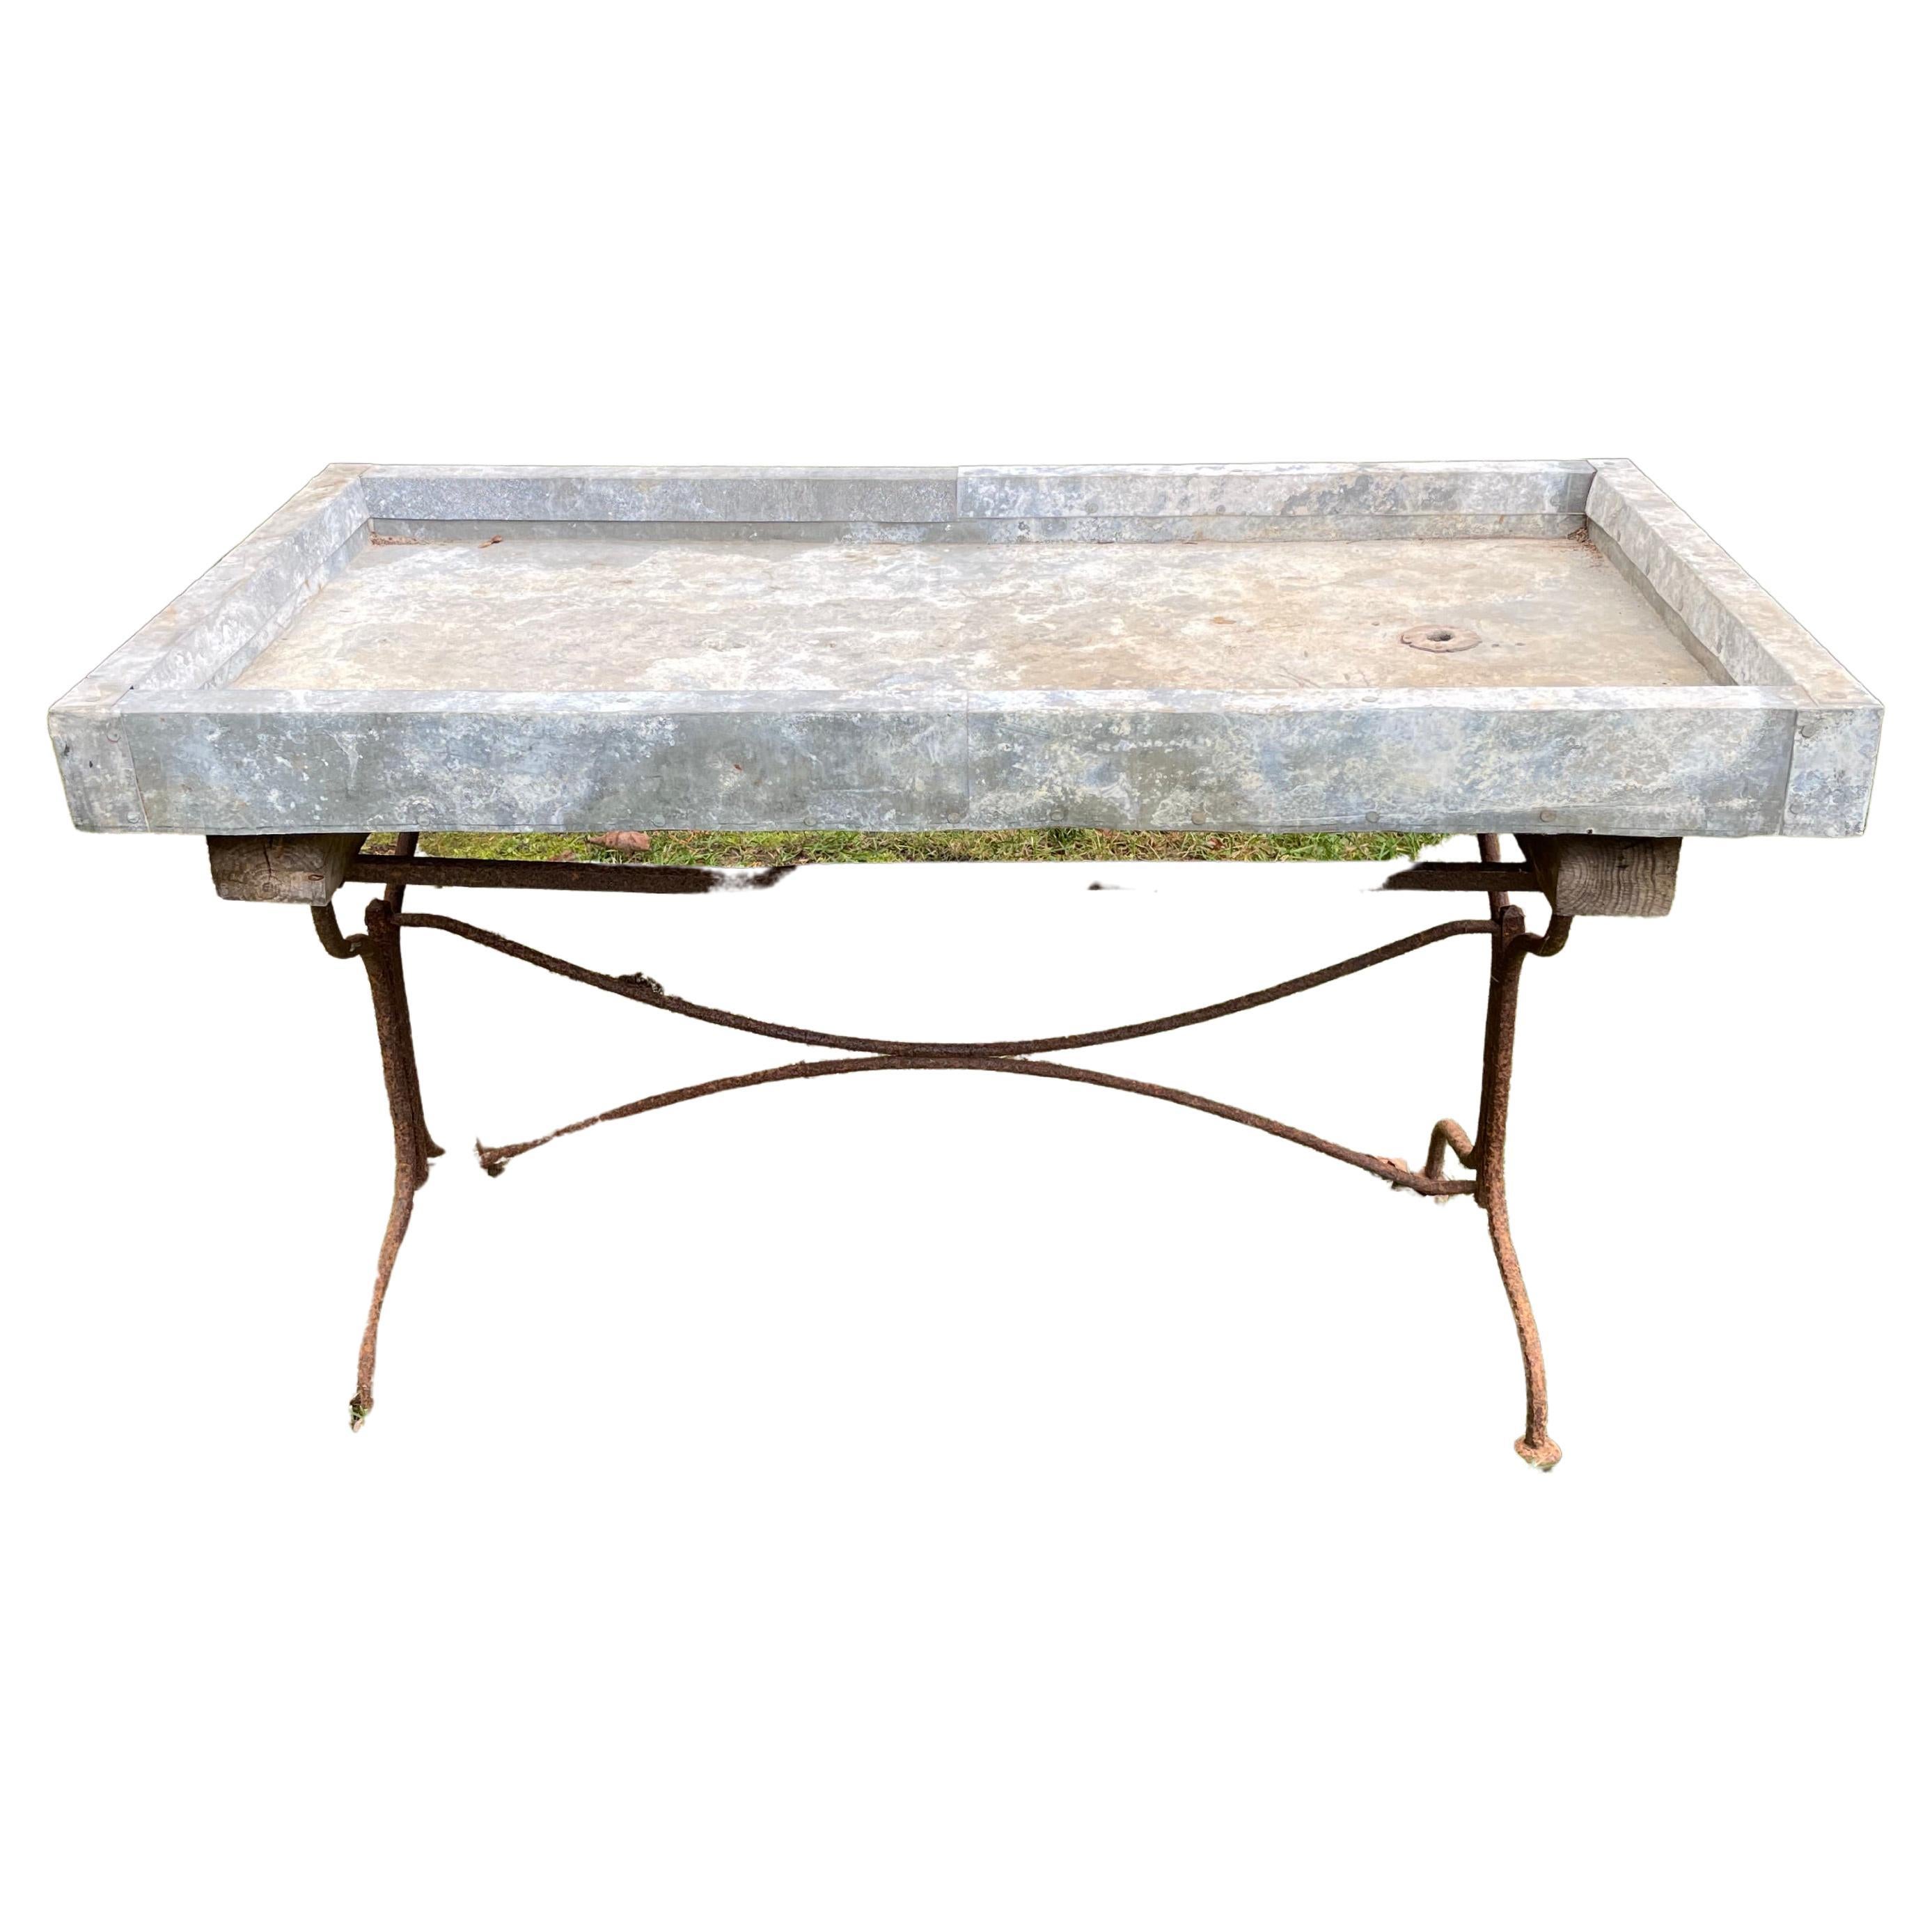 Two French Zinc and Iron Potting Tables, CA 1900